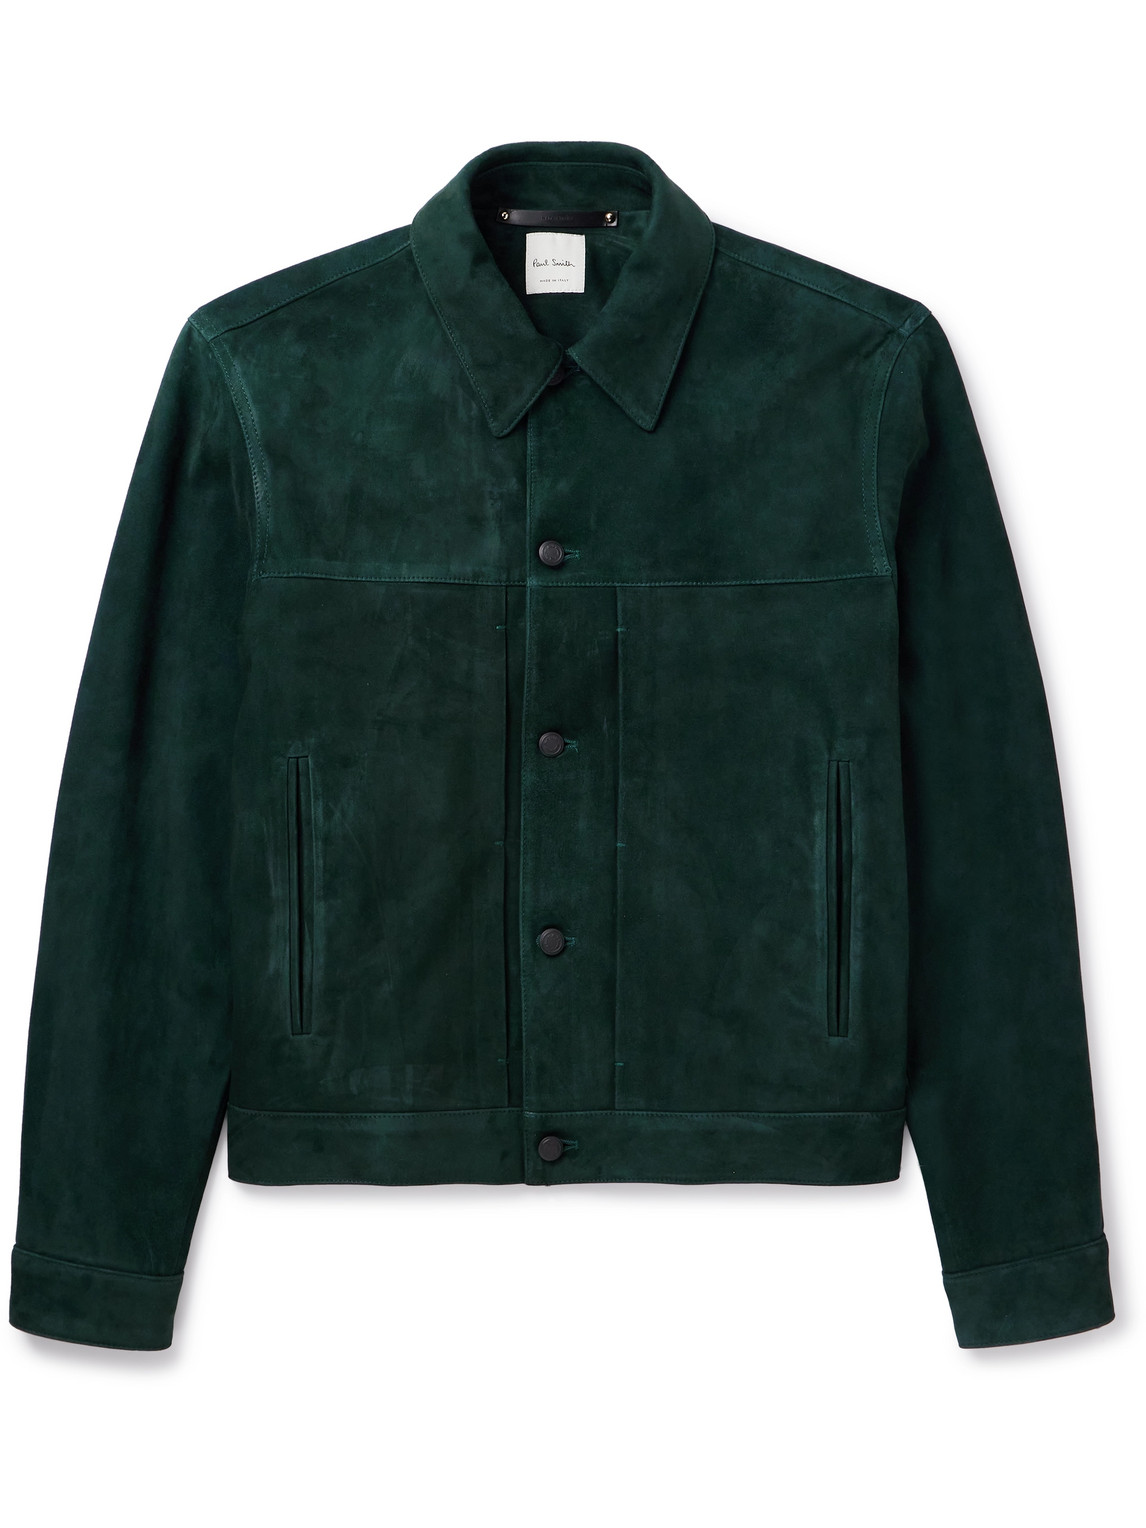 Paul Smith Suede Jacket In Green